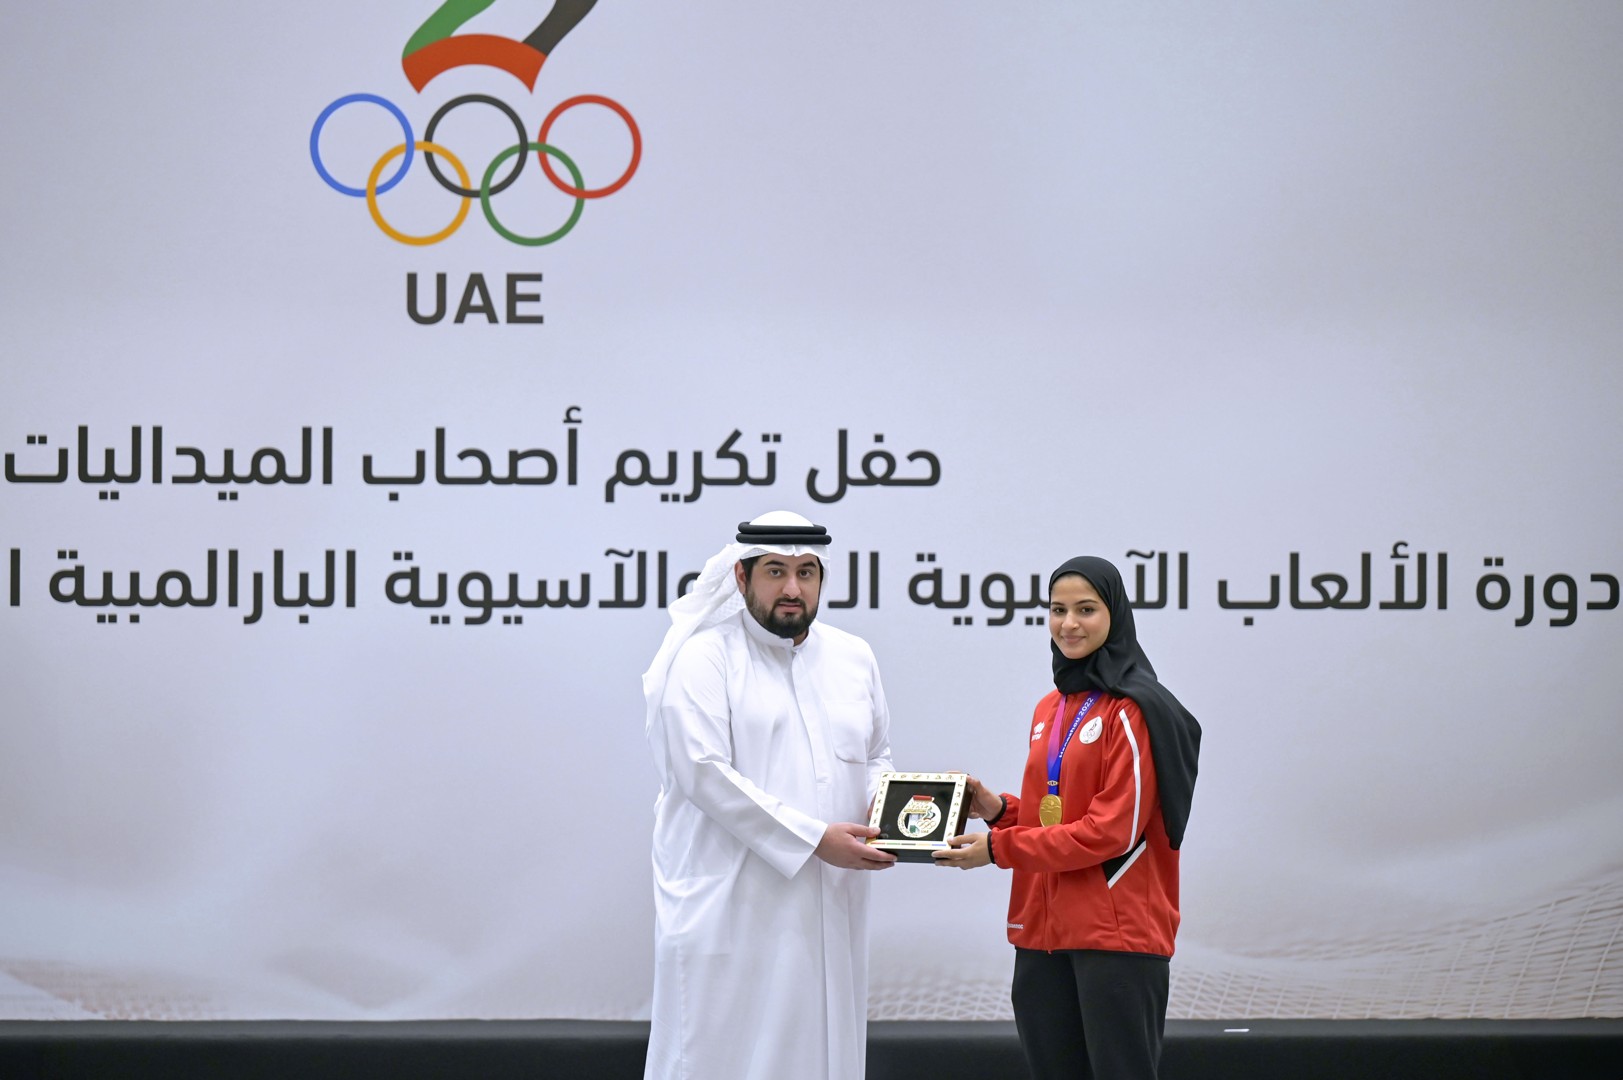 Ahmed bin Mohammed honours UAE’s champion athletes who excelled in the Asian Games and Asian Para Games